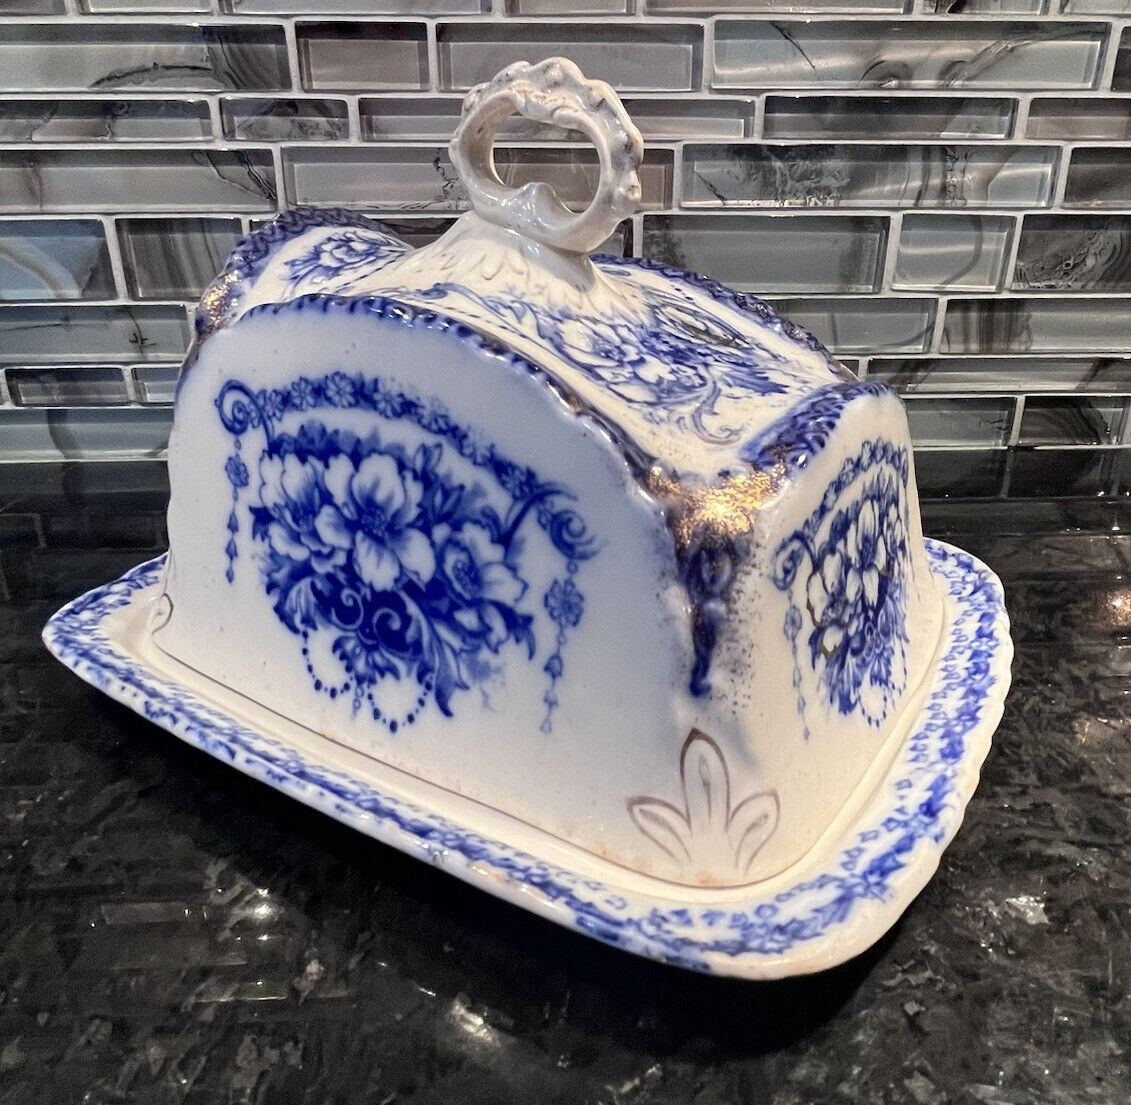 Antique Victorian Staffordshire England Cheese Keeper Ornate Handle Blue & White